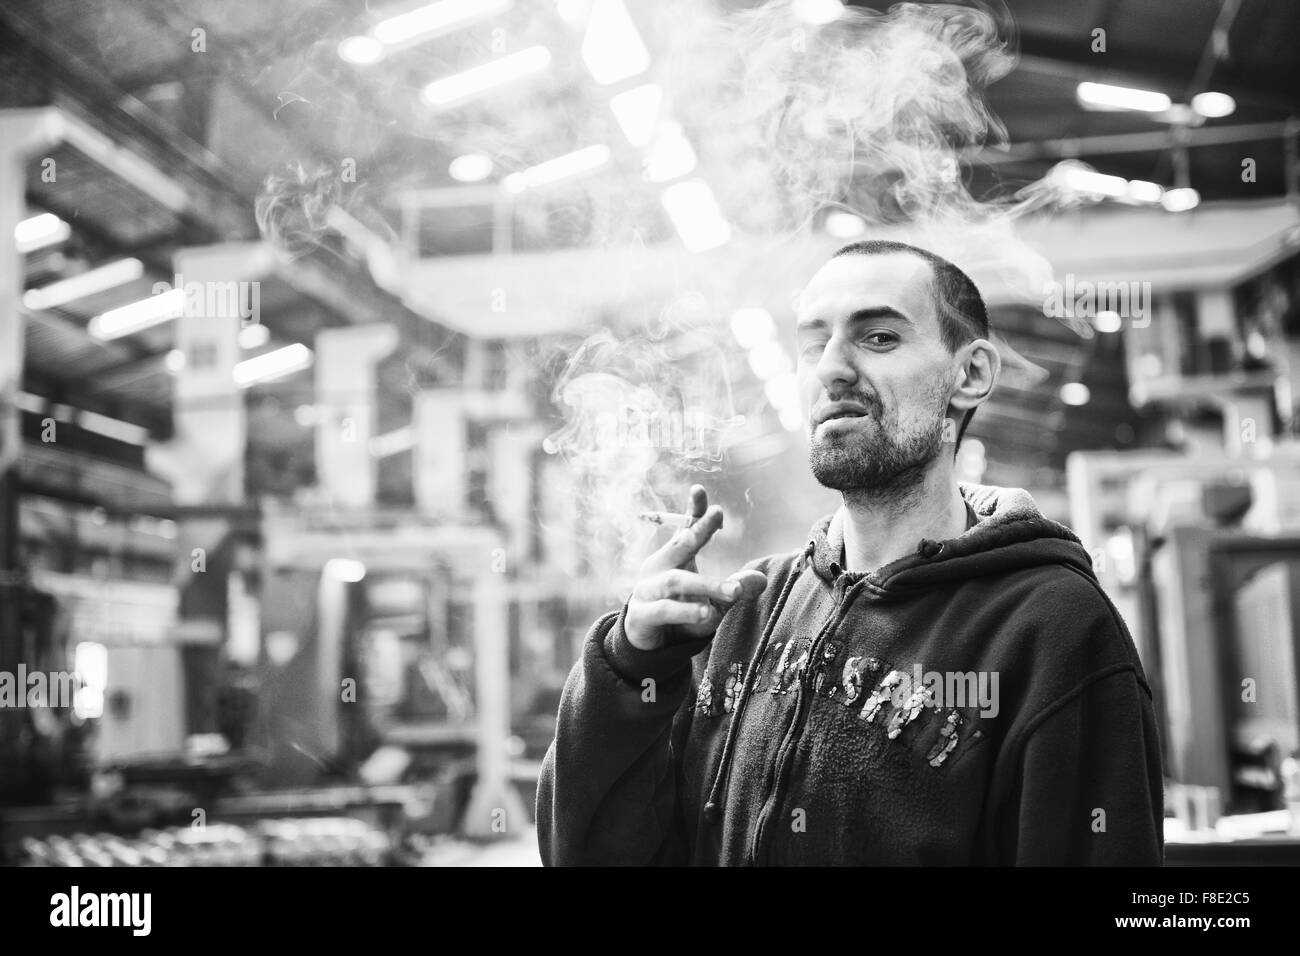 industry worker smoke cigarette at job in company at big bright hall Stock Photo